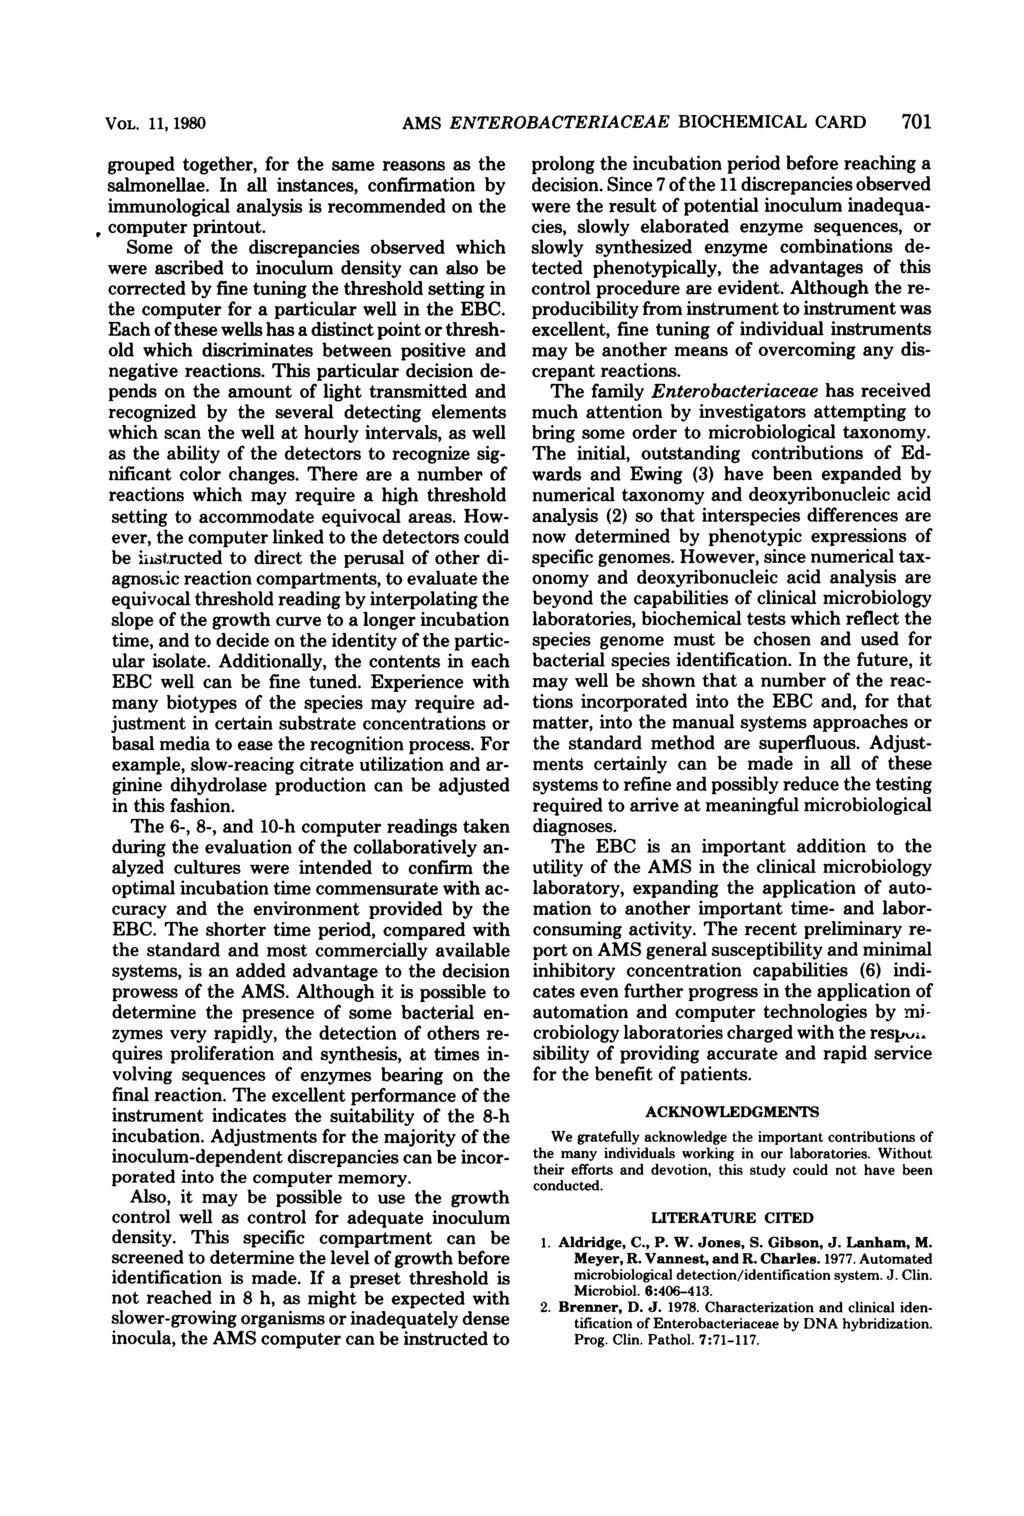 VOL. 11, 1980 grouped together, for the same reasons as the salmonellae. In all instances, confirmation by immunological analysis is recommended on the computer printout.